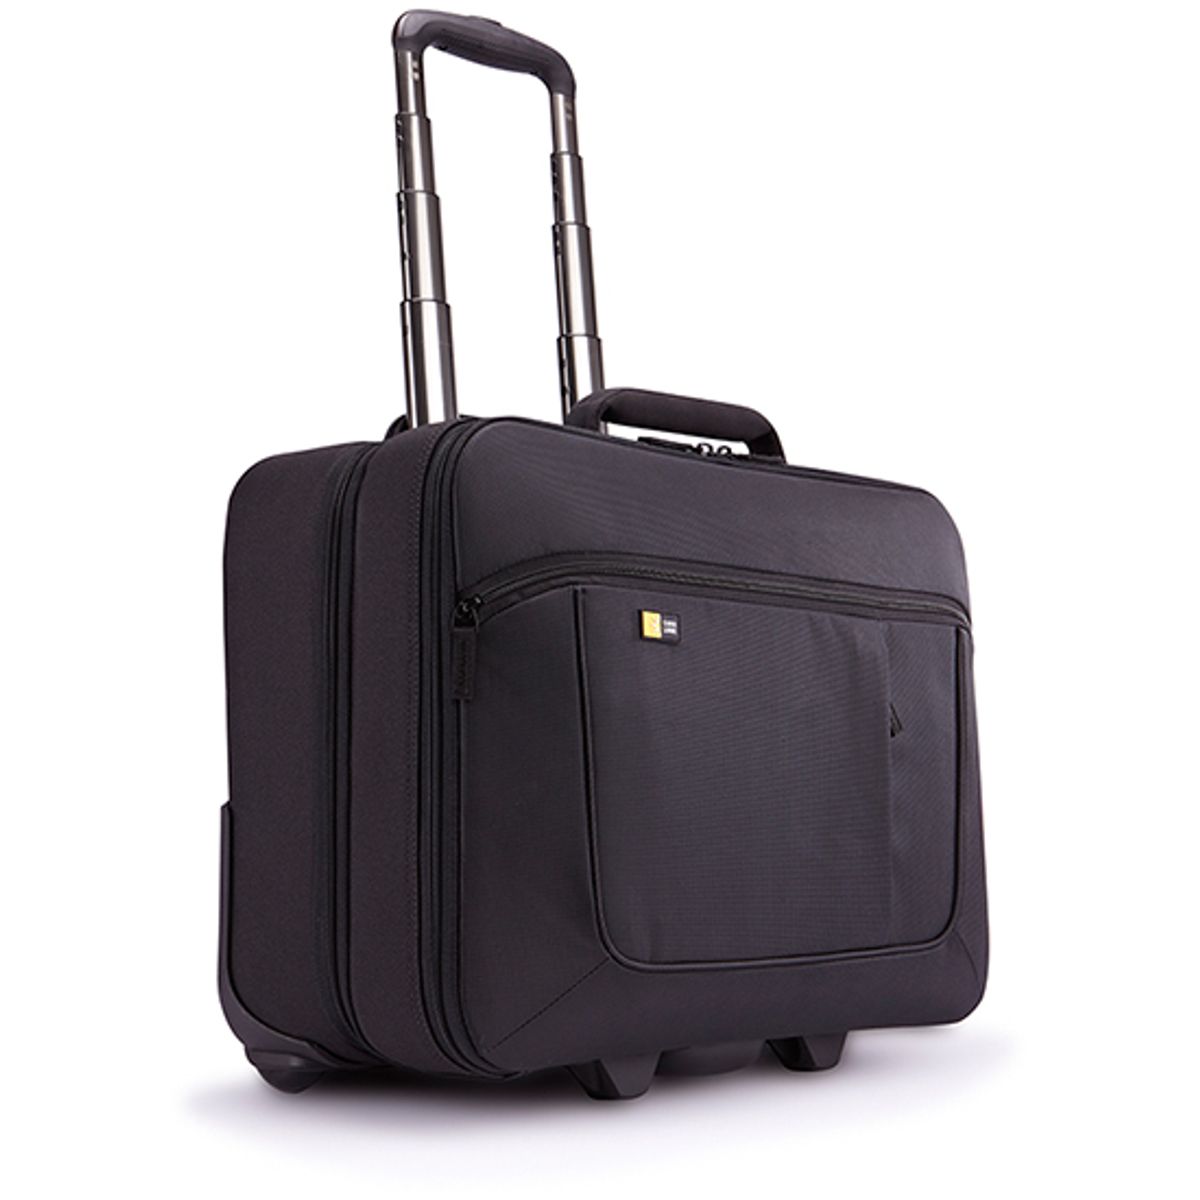 Case Logic Laptop/Tablet Roller 17.3" laptop and iPad® rolling briefcase